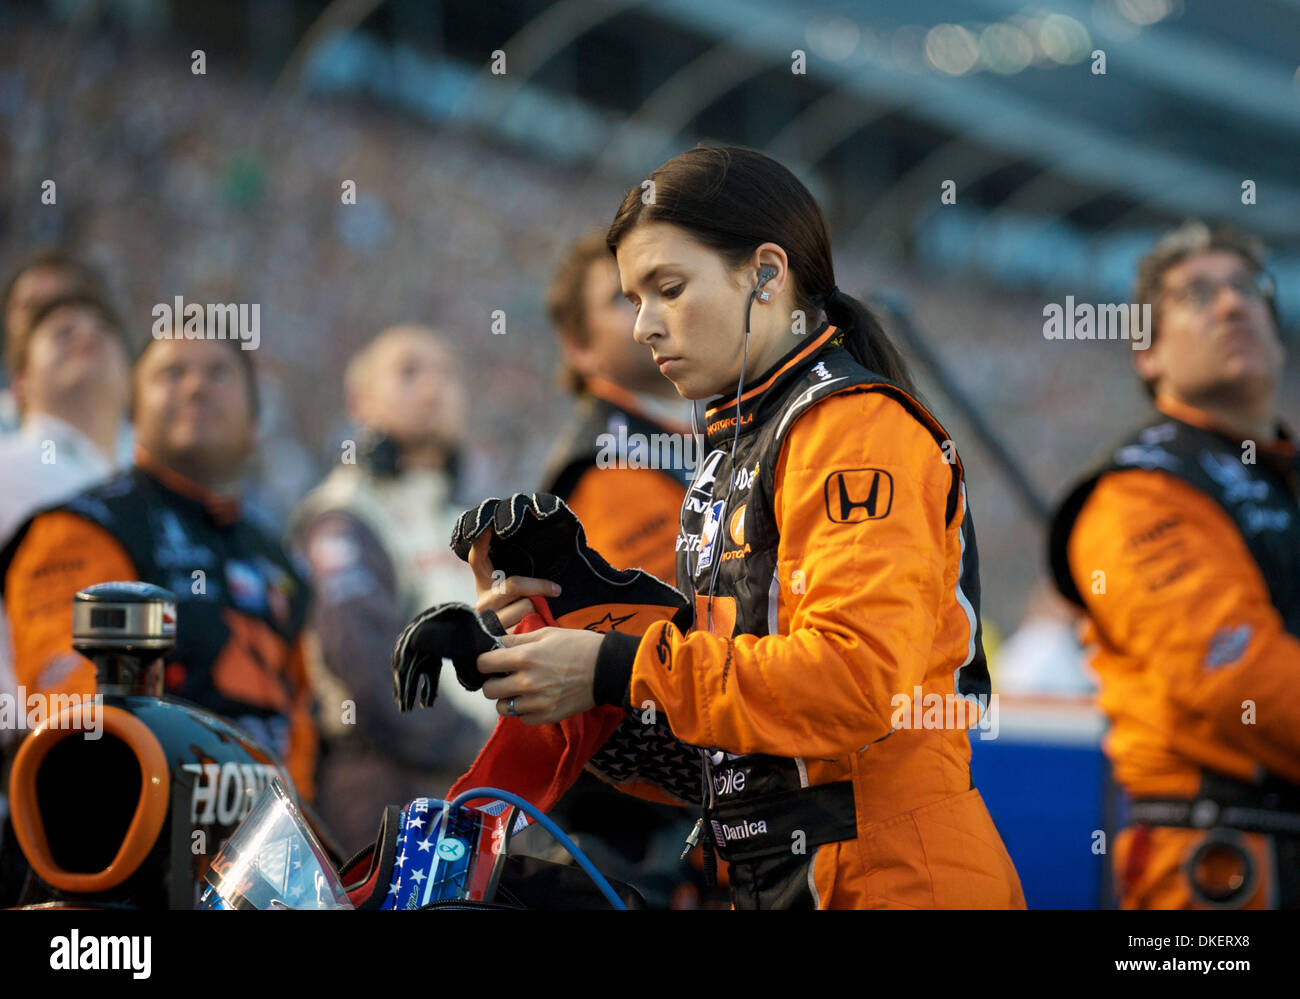 Jun 06, 2009 - Dallas, Texas, United States of America - Andretti Green Driver driver DANICA PATRICK prepares to enter her #7 car to begin the race at the Bombardier Learjet 550k at the Texas Motor Speedway in Fort Worth, Texas. (Credit Image: © Albert Pena/Southcreek EMI/ZUMA Press) Stock Photo